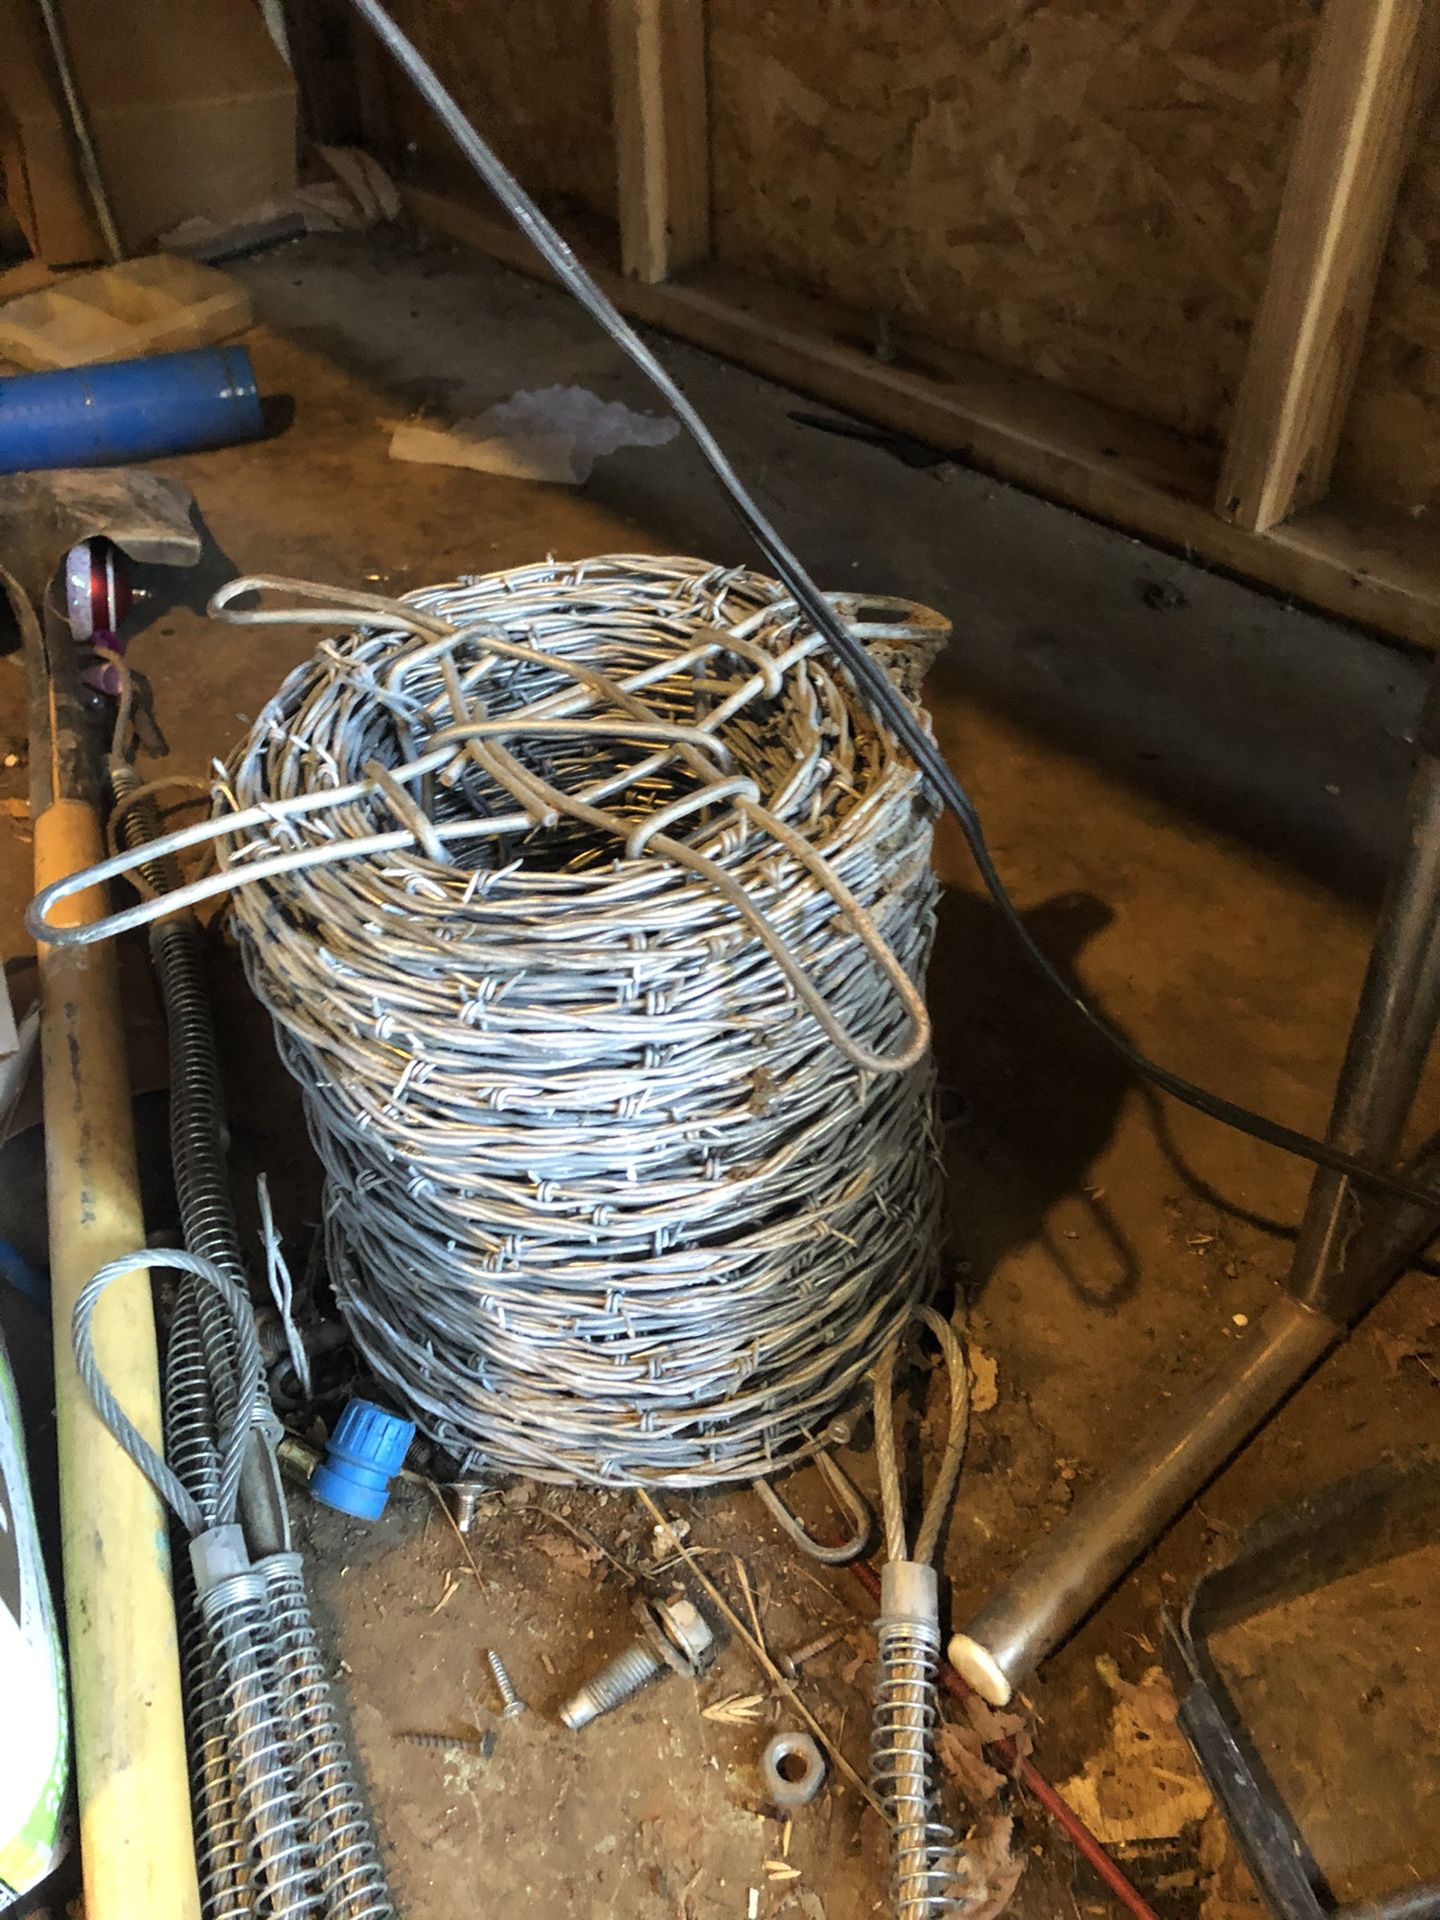 Barbed wire roll